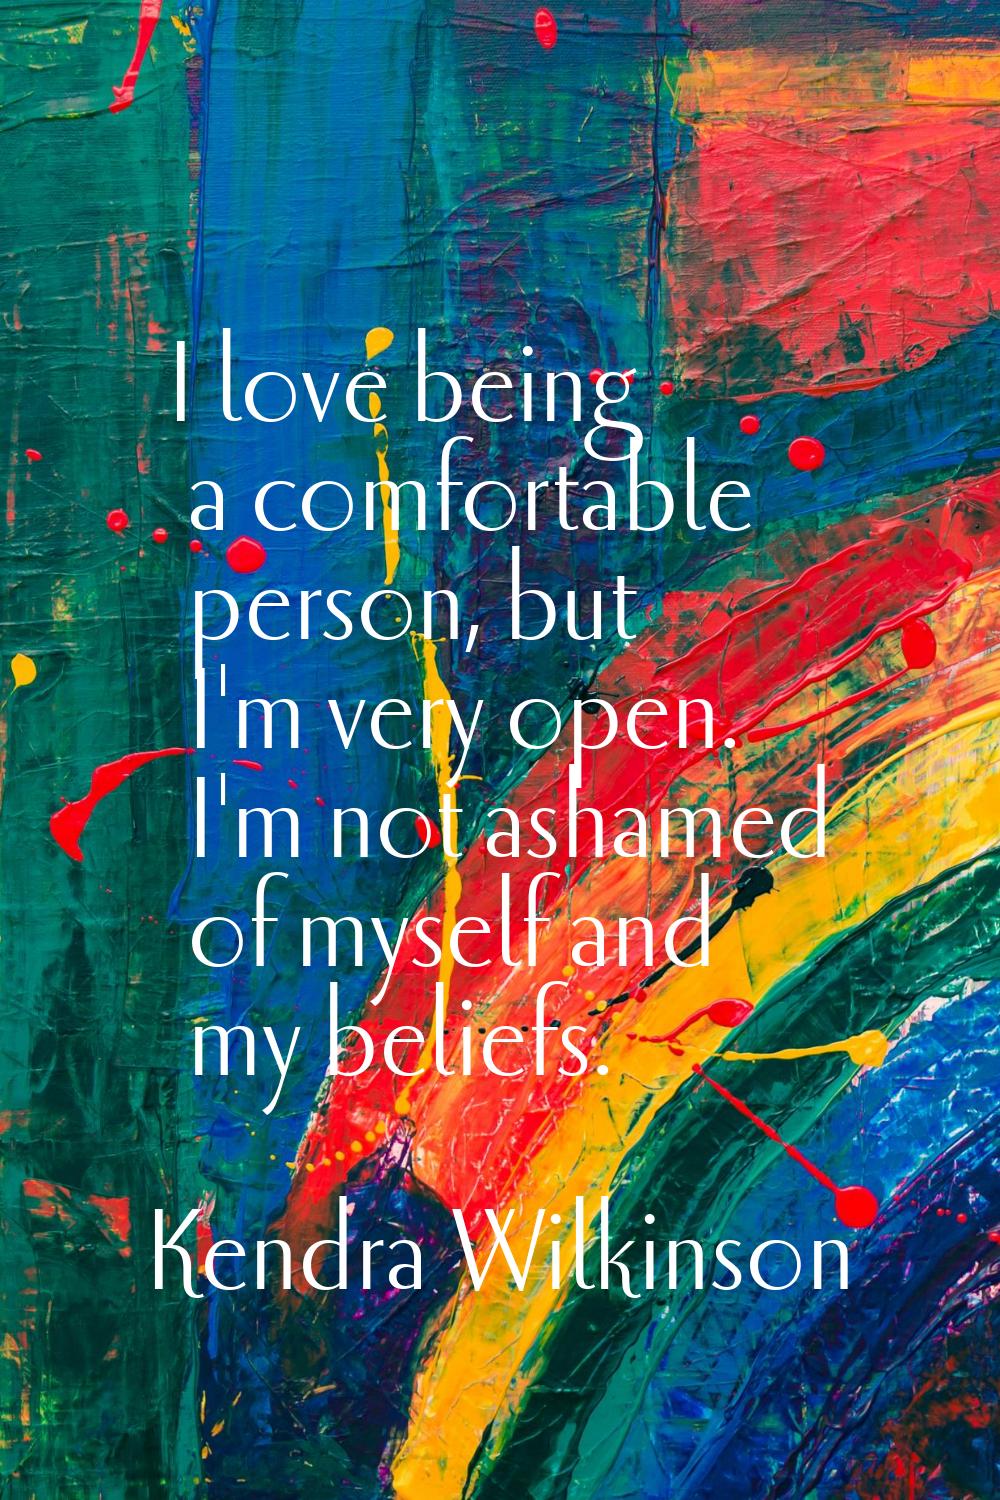 I love being a comfortable person, but I'm very open. I'm not ashamed of myself and my beliefs.